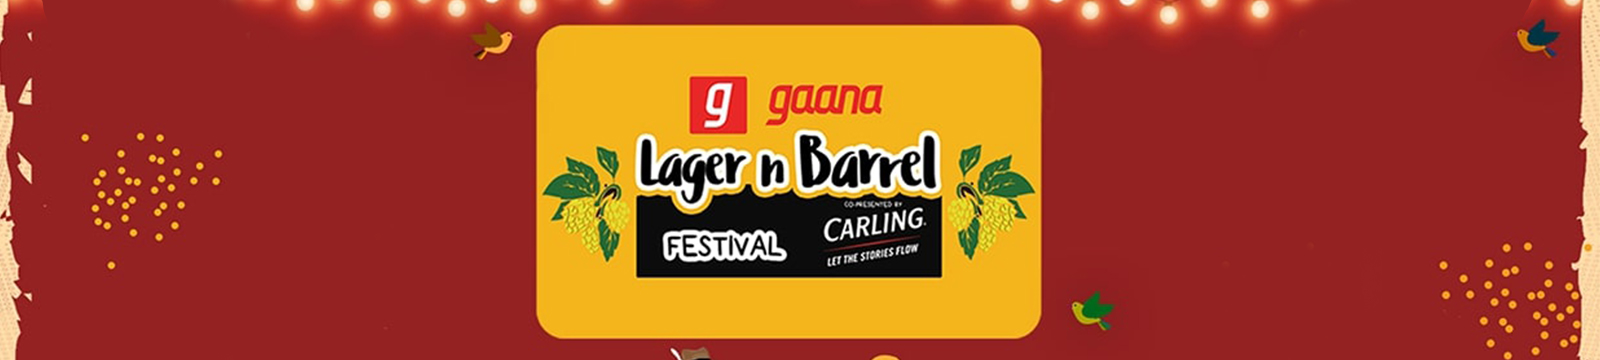 Say Cheers to the Lager N Barrel Festival